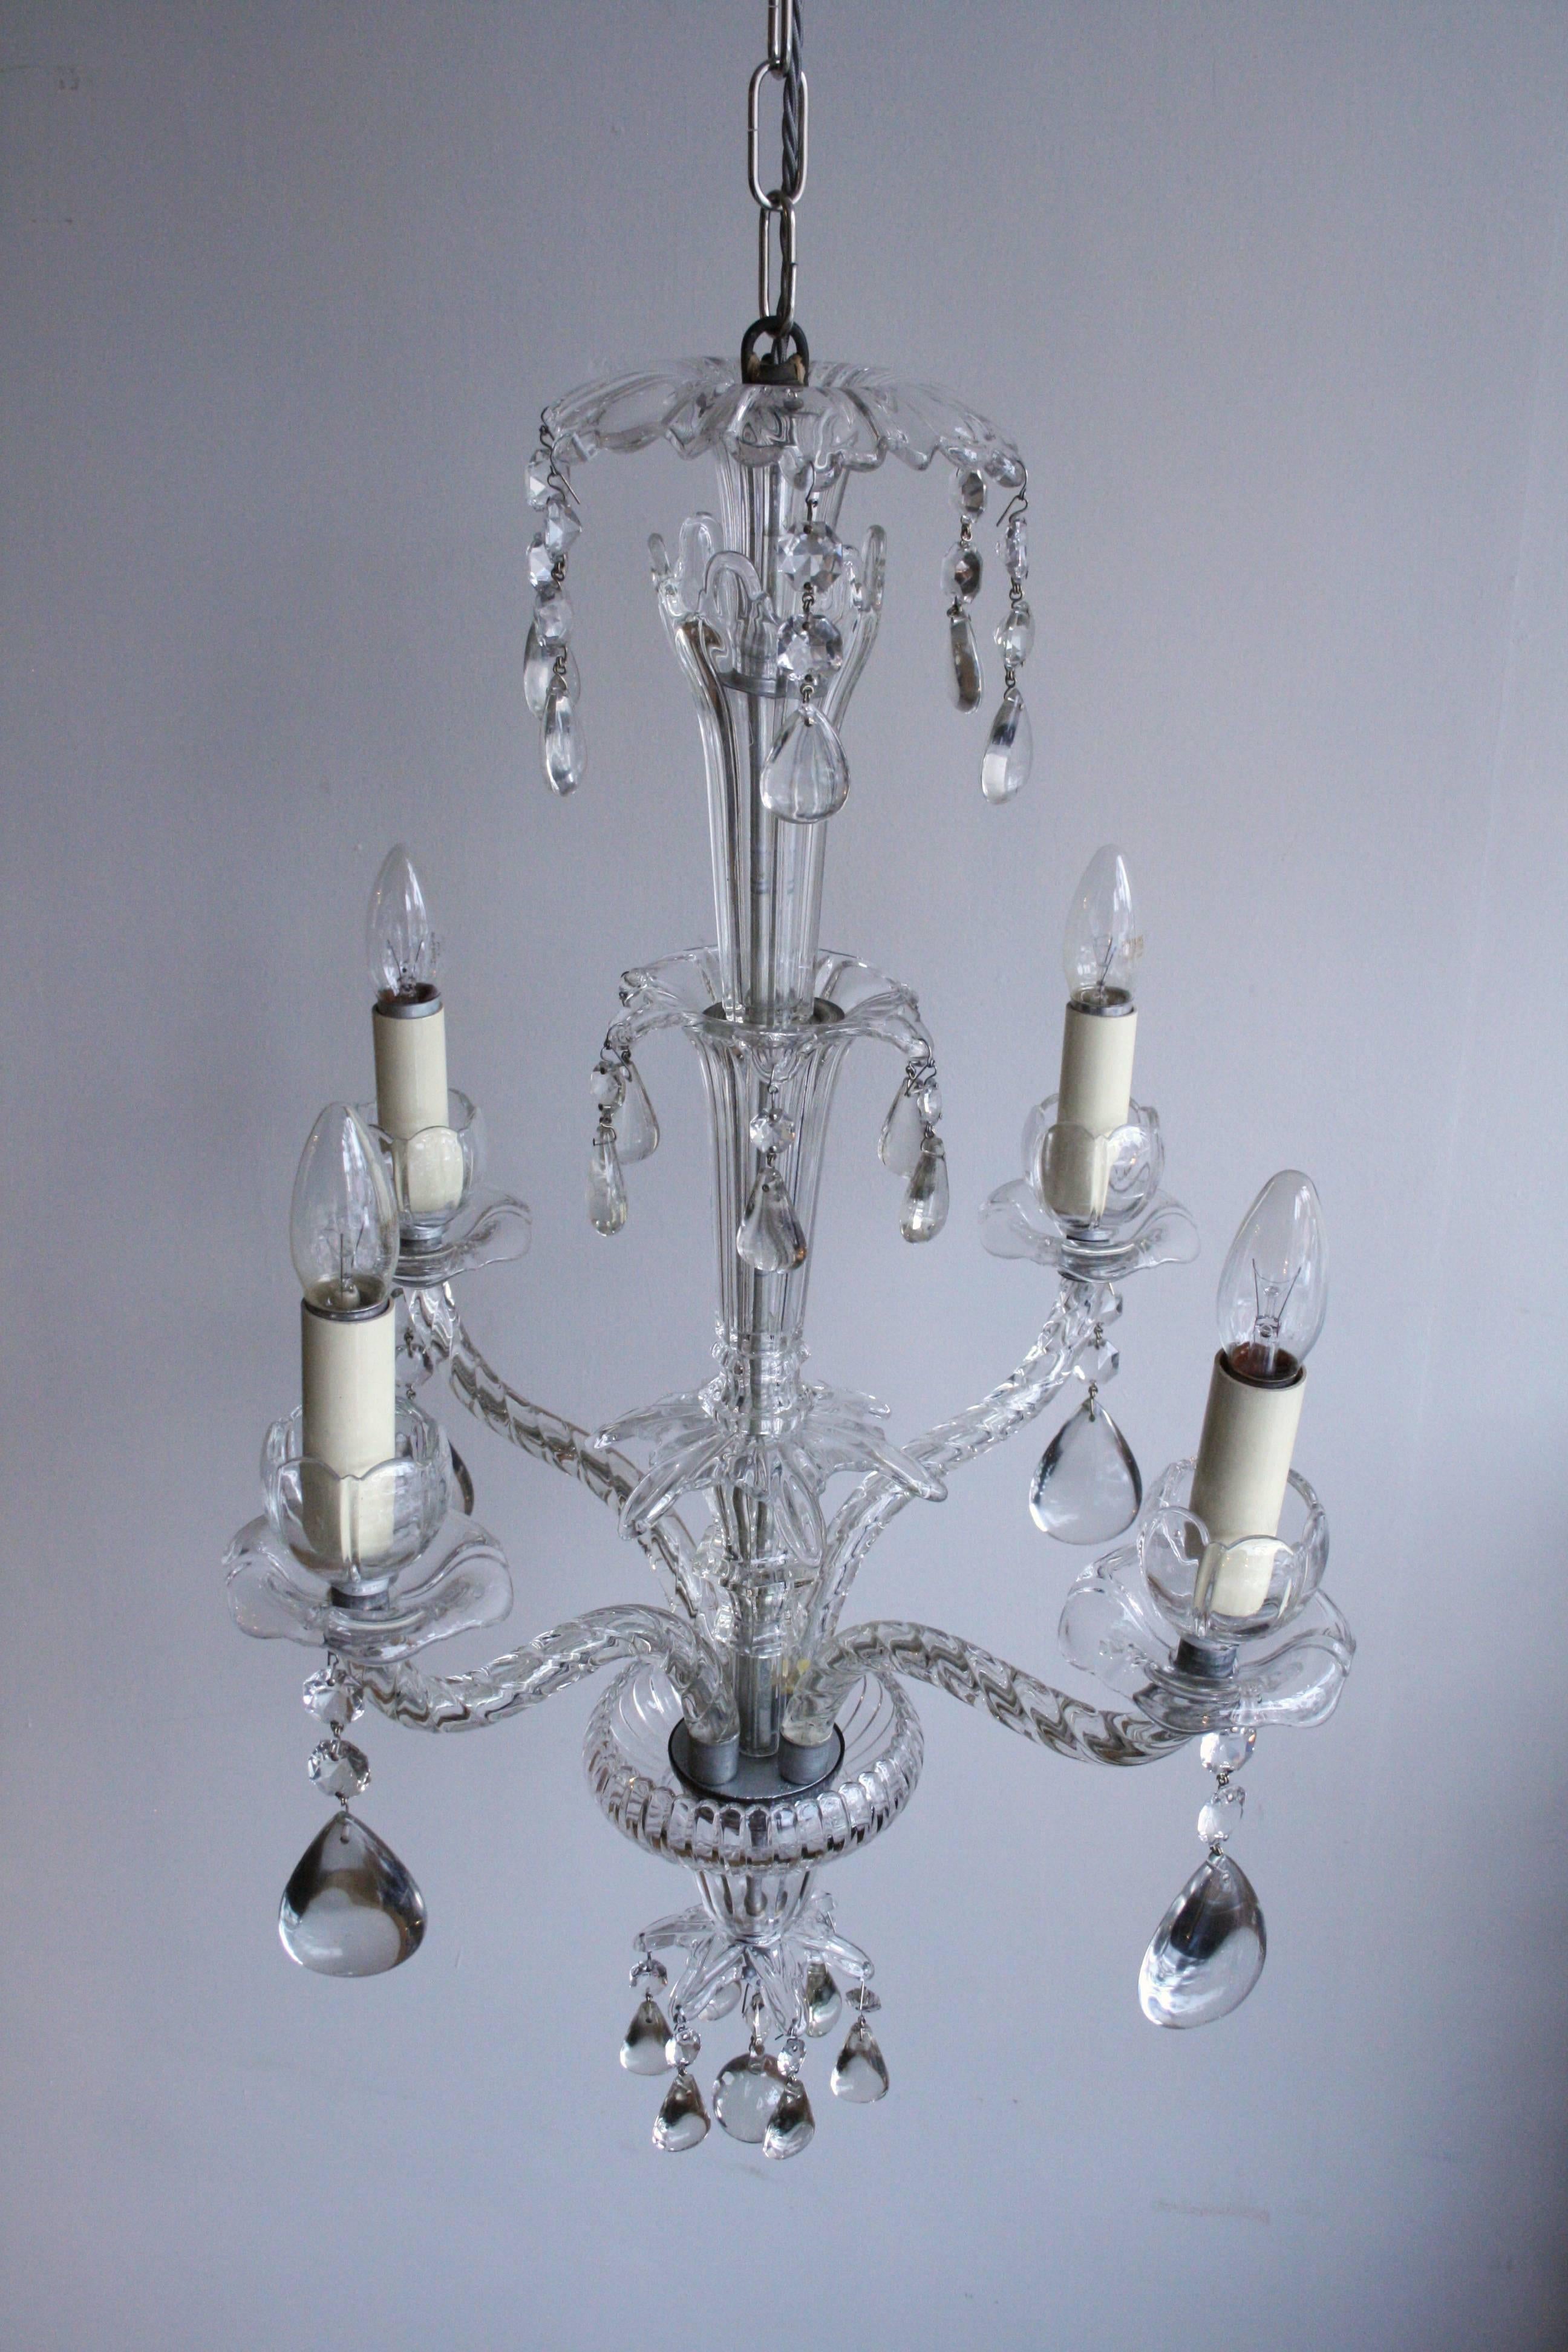 Early 20th century moulded crystal chandelier with rounded crystal pear drops.
Chandelier uses four SES fittings, E14. Supplied with chain and ceiling rose.